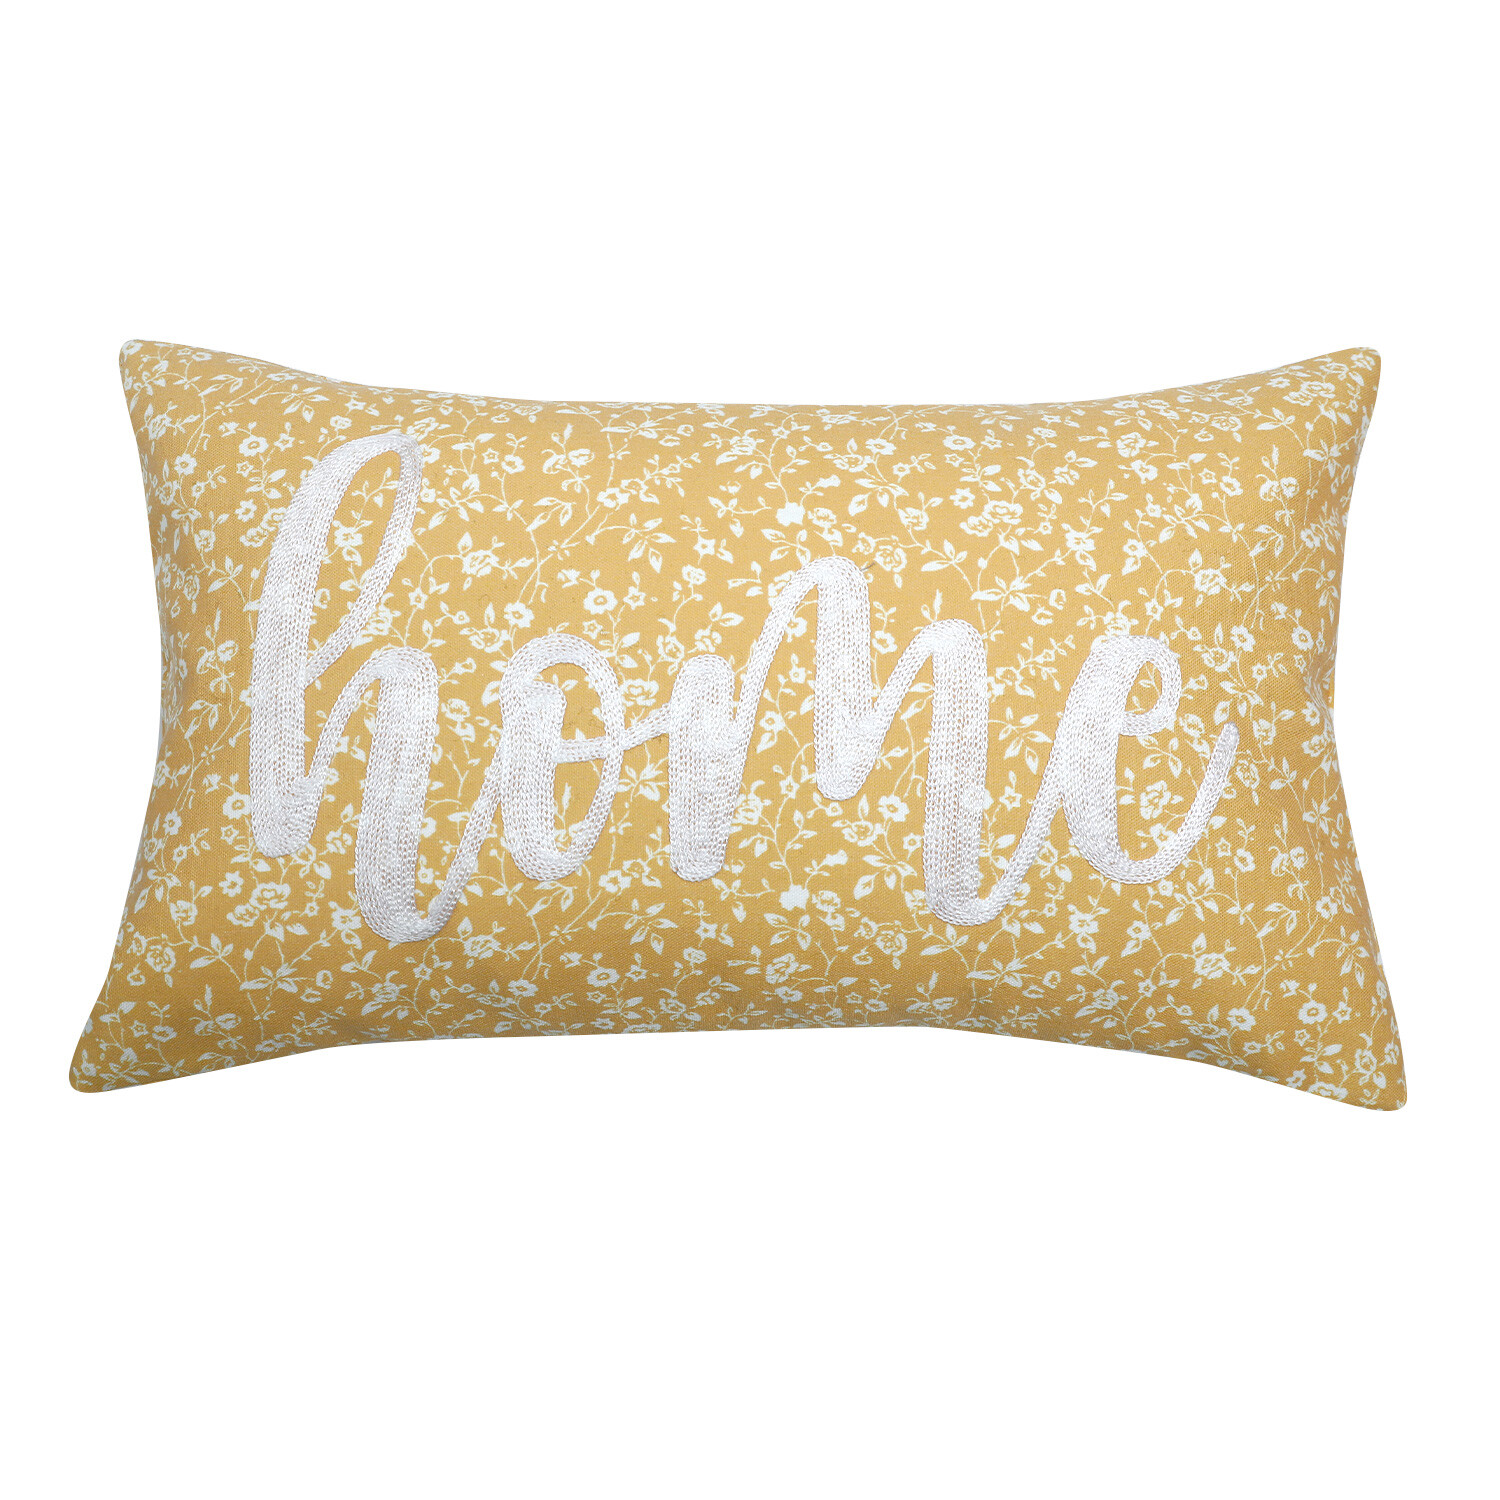 Home Embroidered Cushion - Yellow Image 1